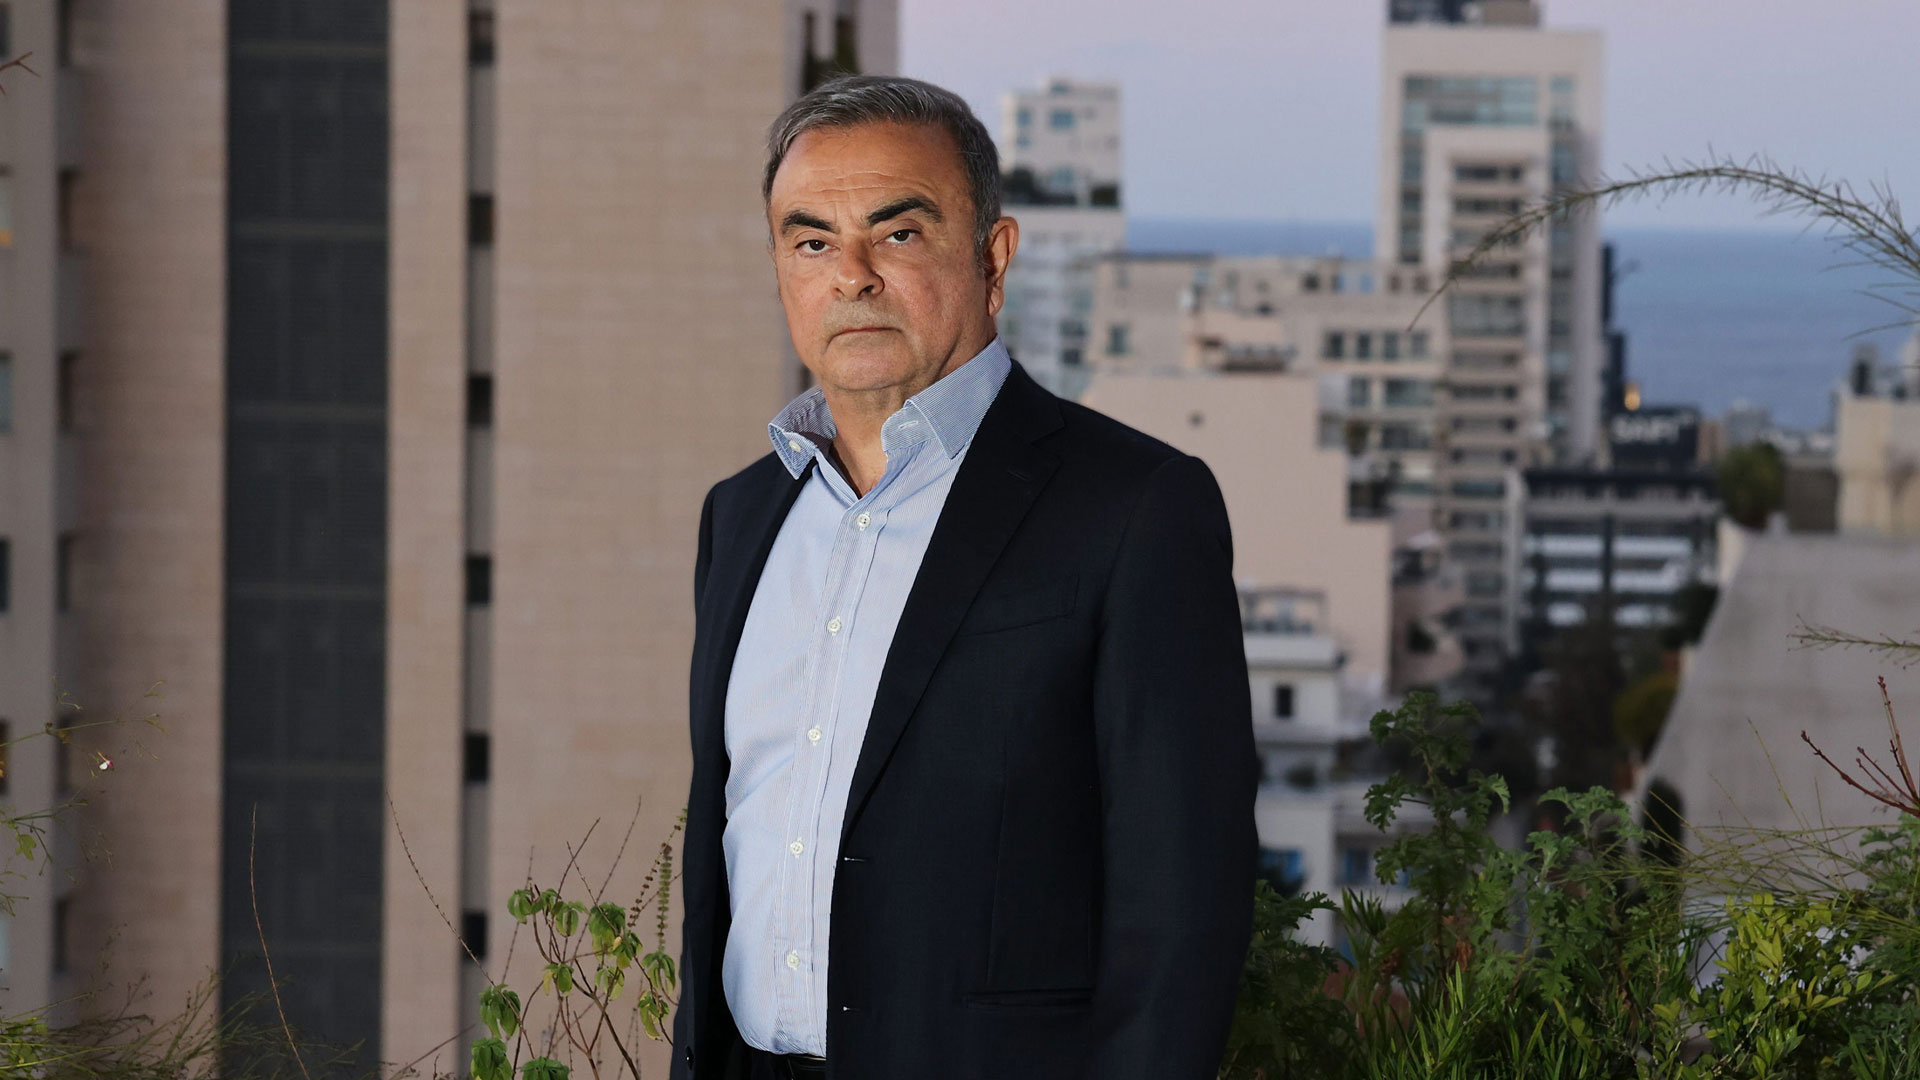 ehemaliger Renault-Nissan-Chef Carlos Ghosn in einem Hotel in Beirut. | picture alliance/dpa/MAXPPP